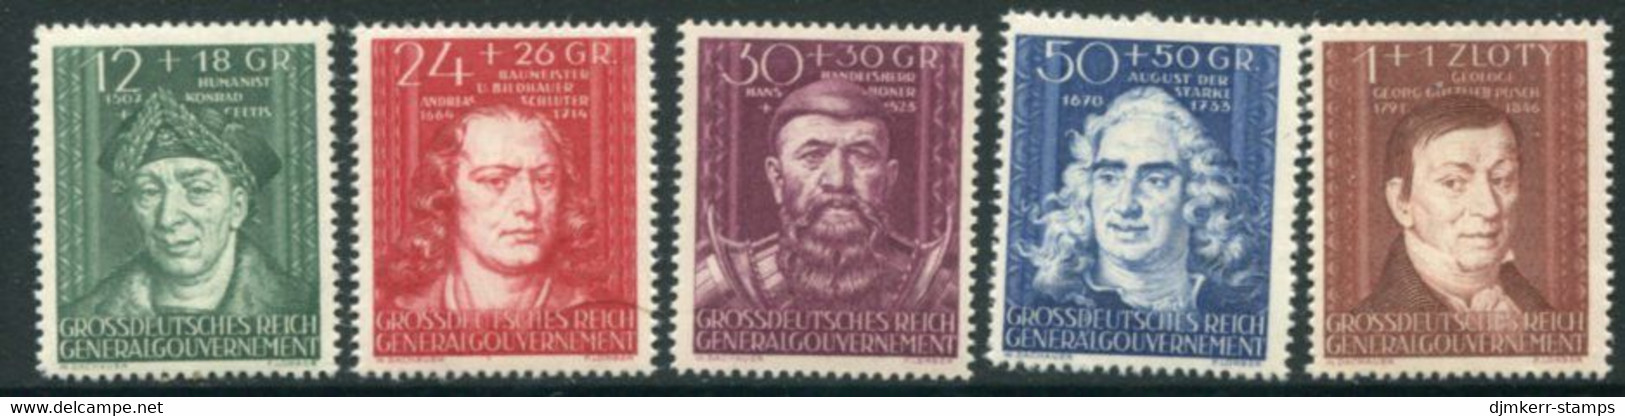 GENERAL GOVERNMENT 1944 Cultural Personalities  MNH / **   Michel 120-24 - Gobierno General